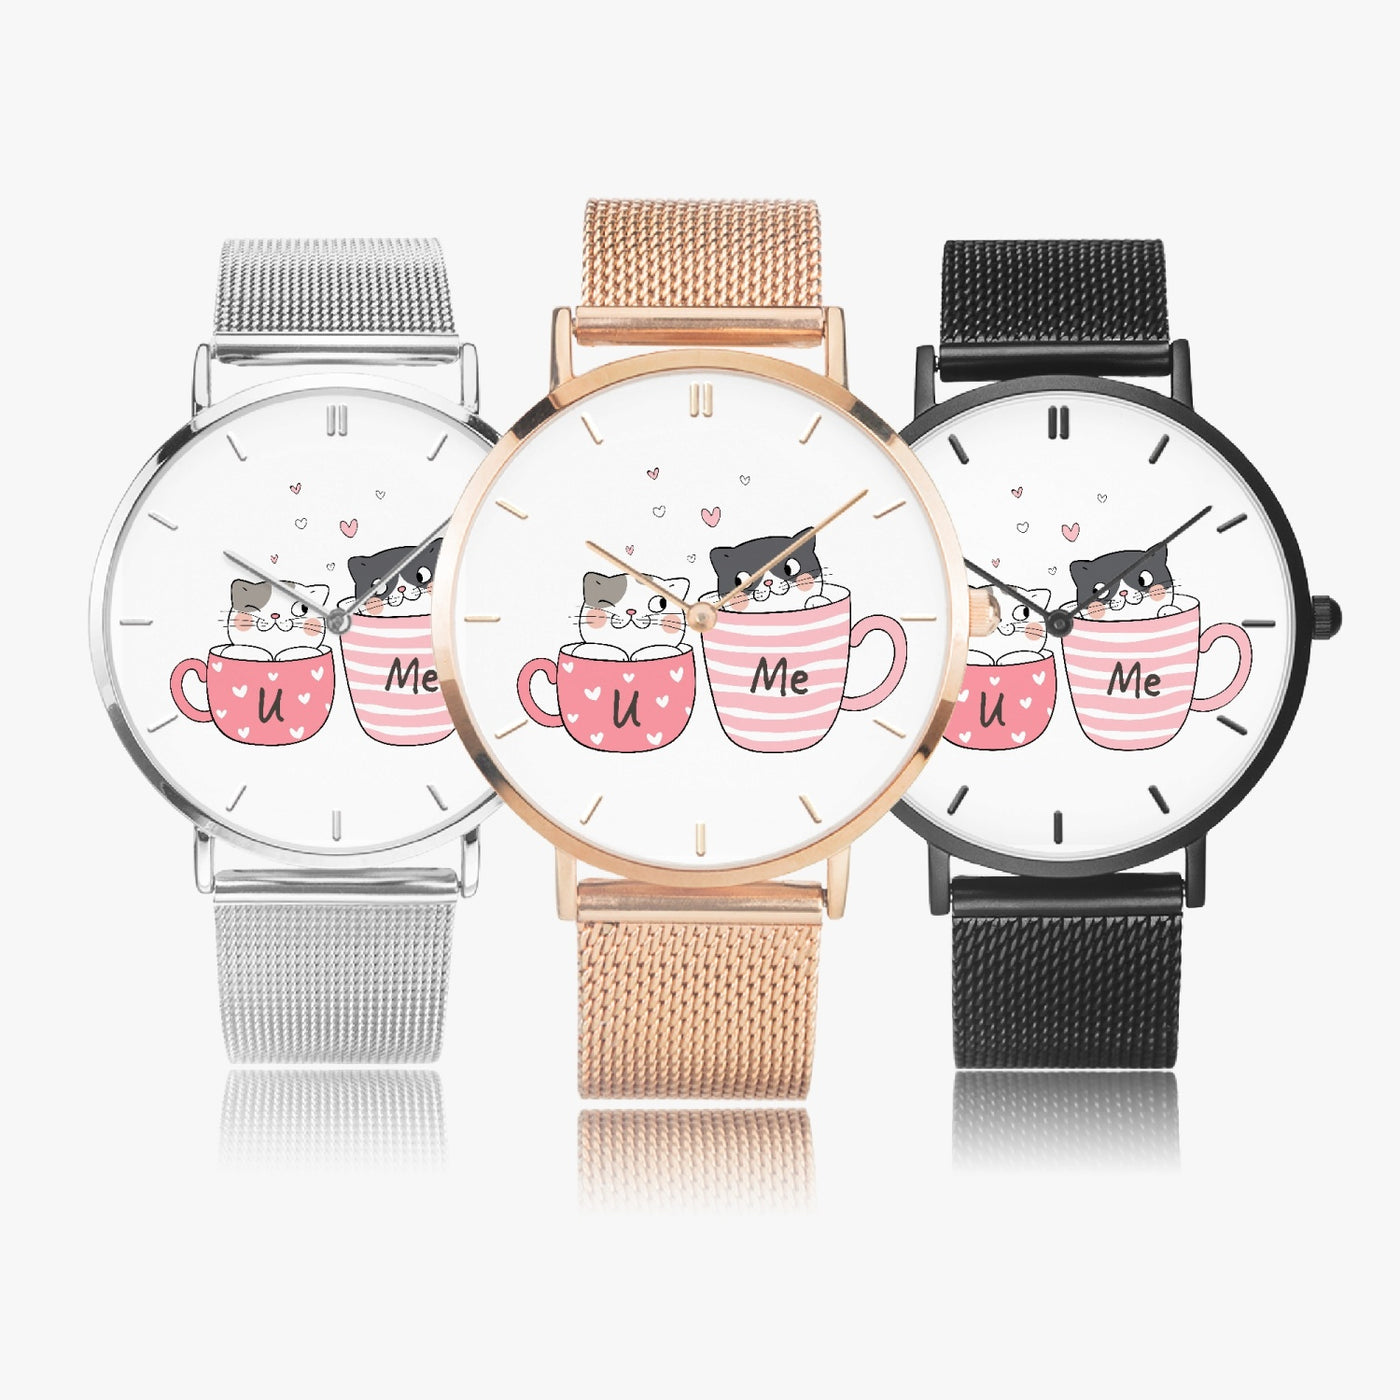 U and Me - Fashion Ultra-thin Stainless Steel Quartz Watch (With Indicators)